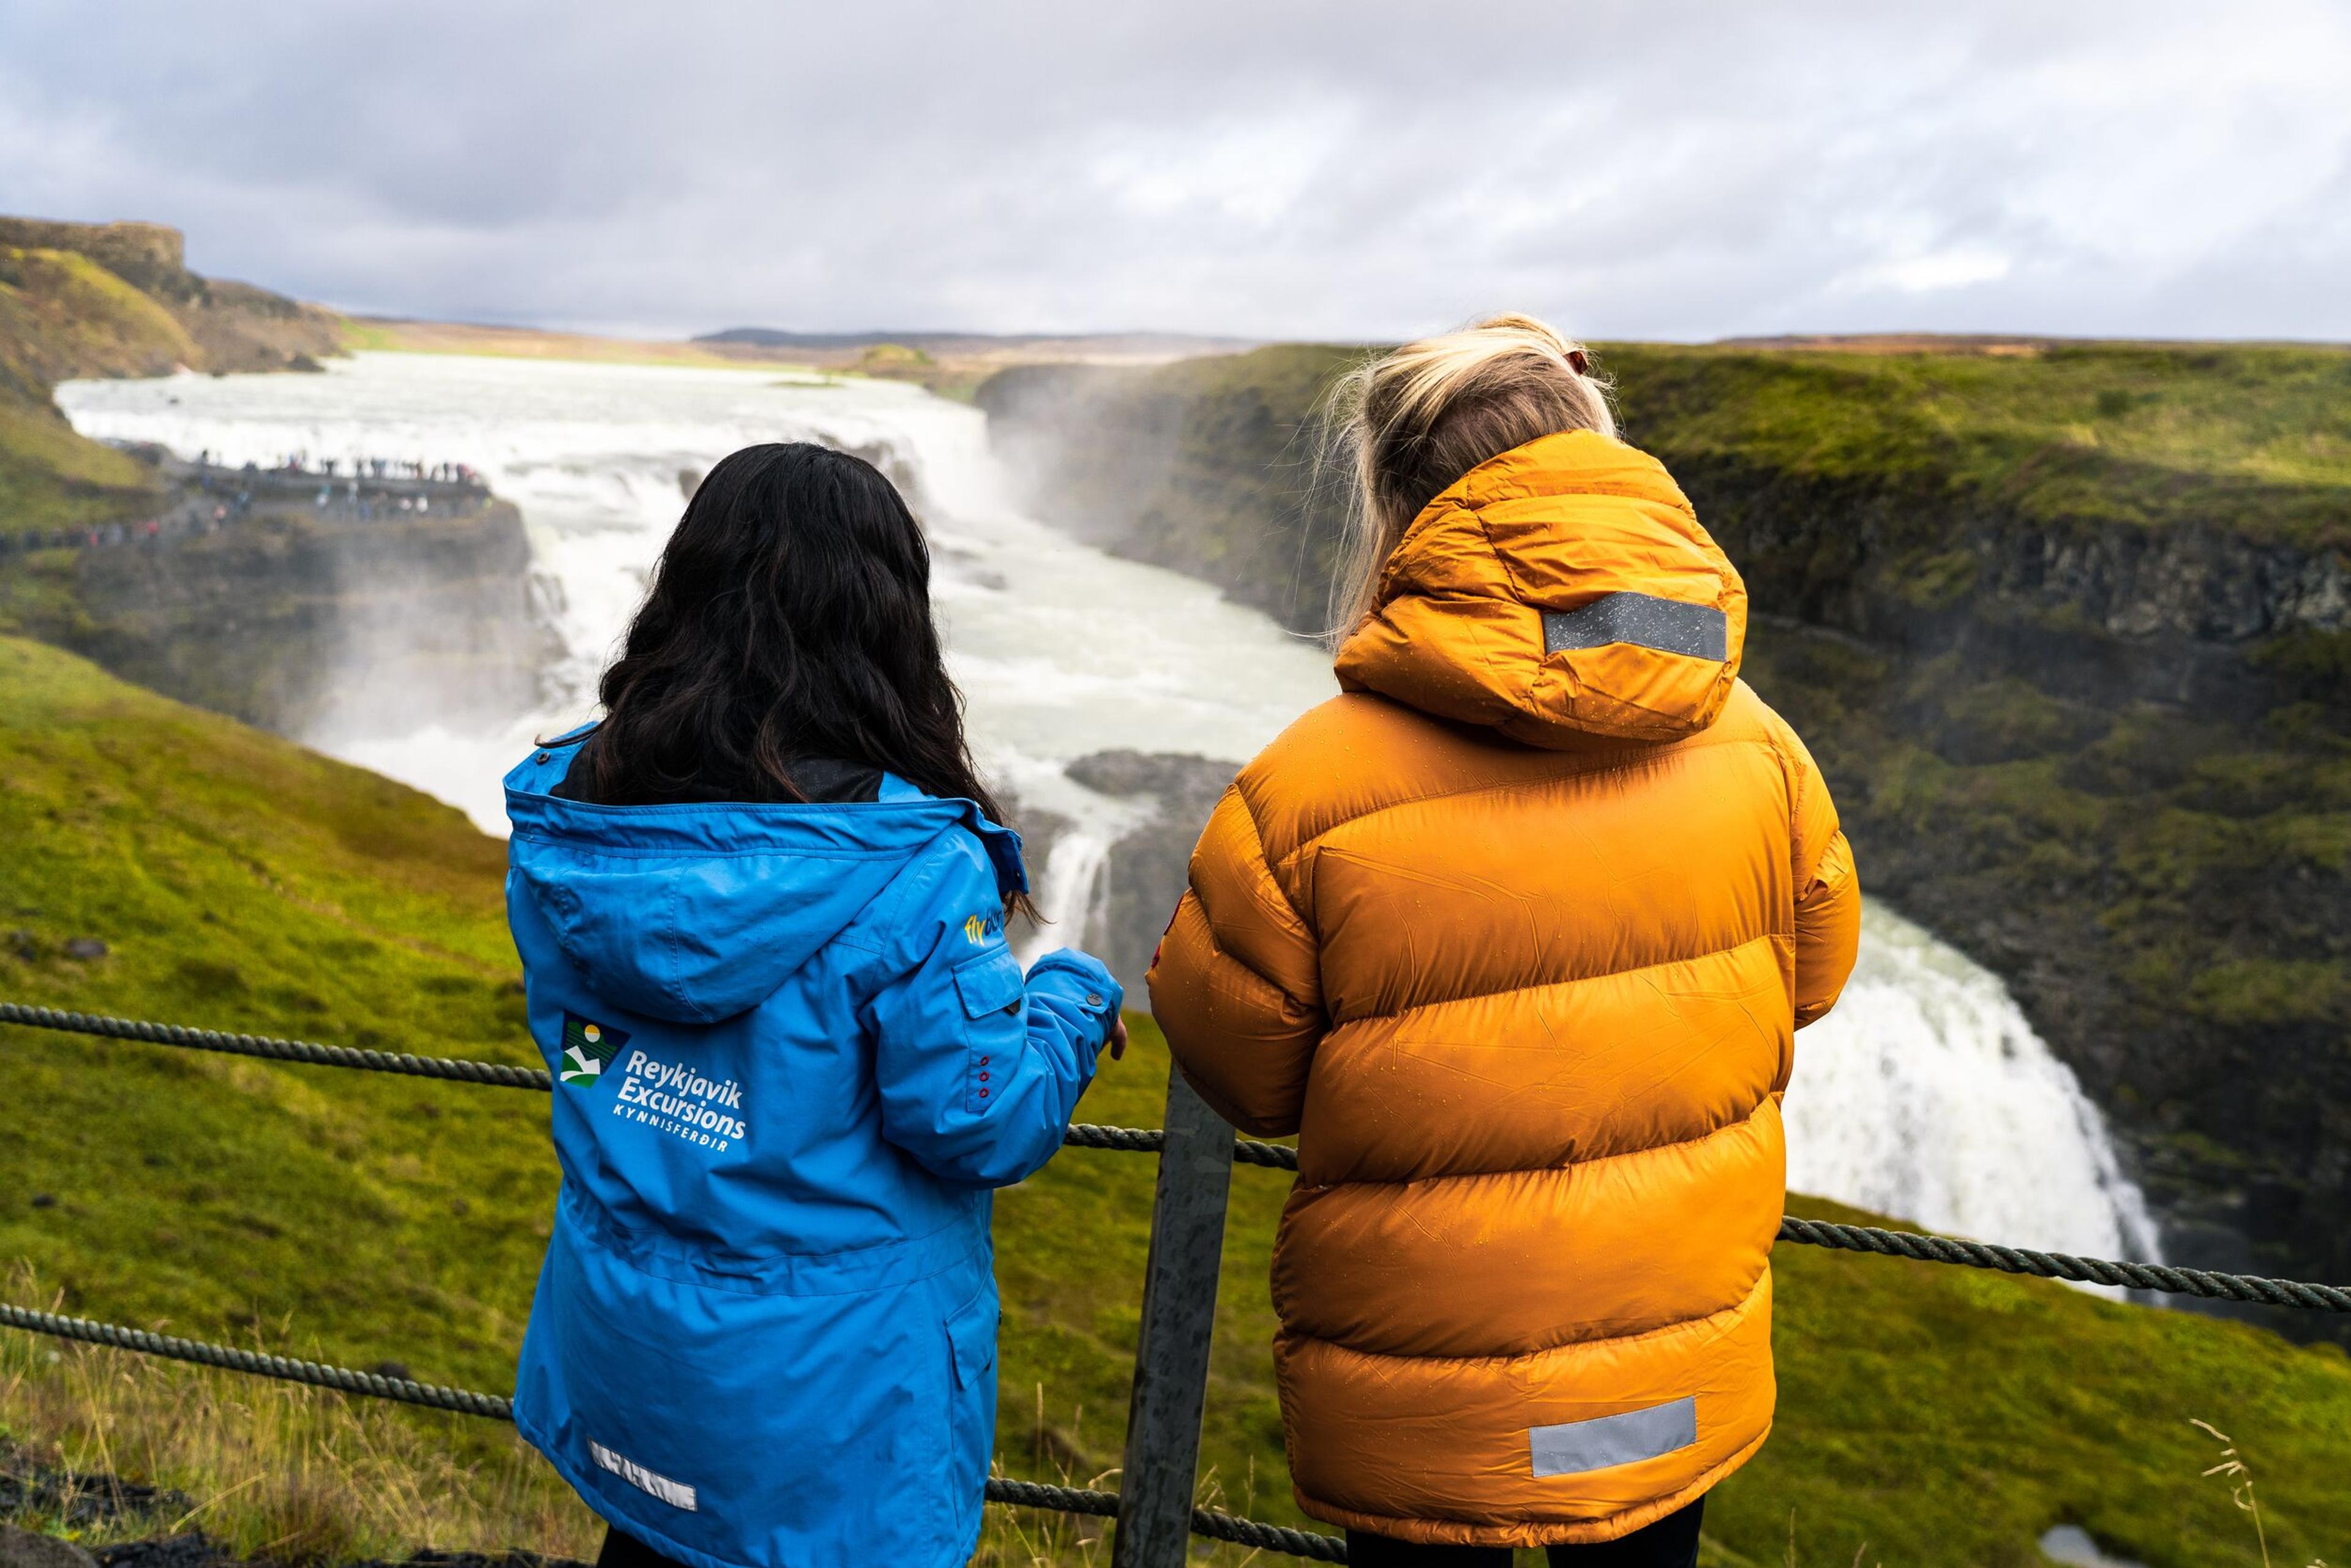 A guide from Reykjavik Excursions passionately explains Gullfoss to a curious tourist. Both captivated by the breathtaking waterfall.